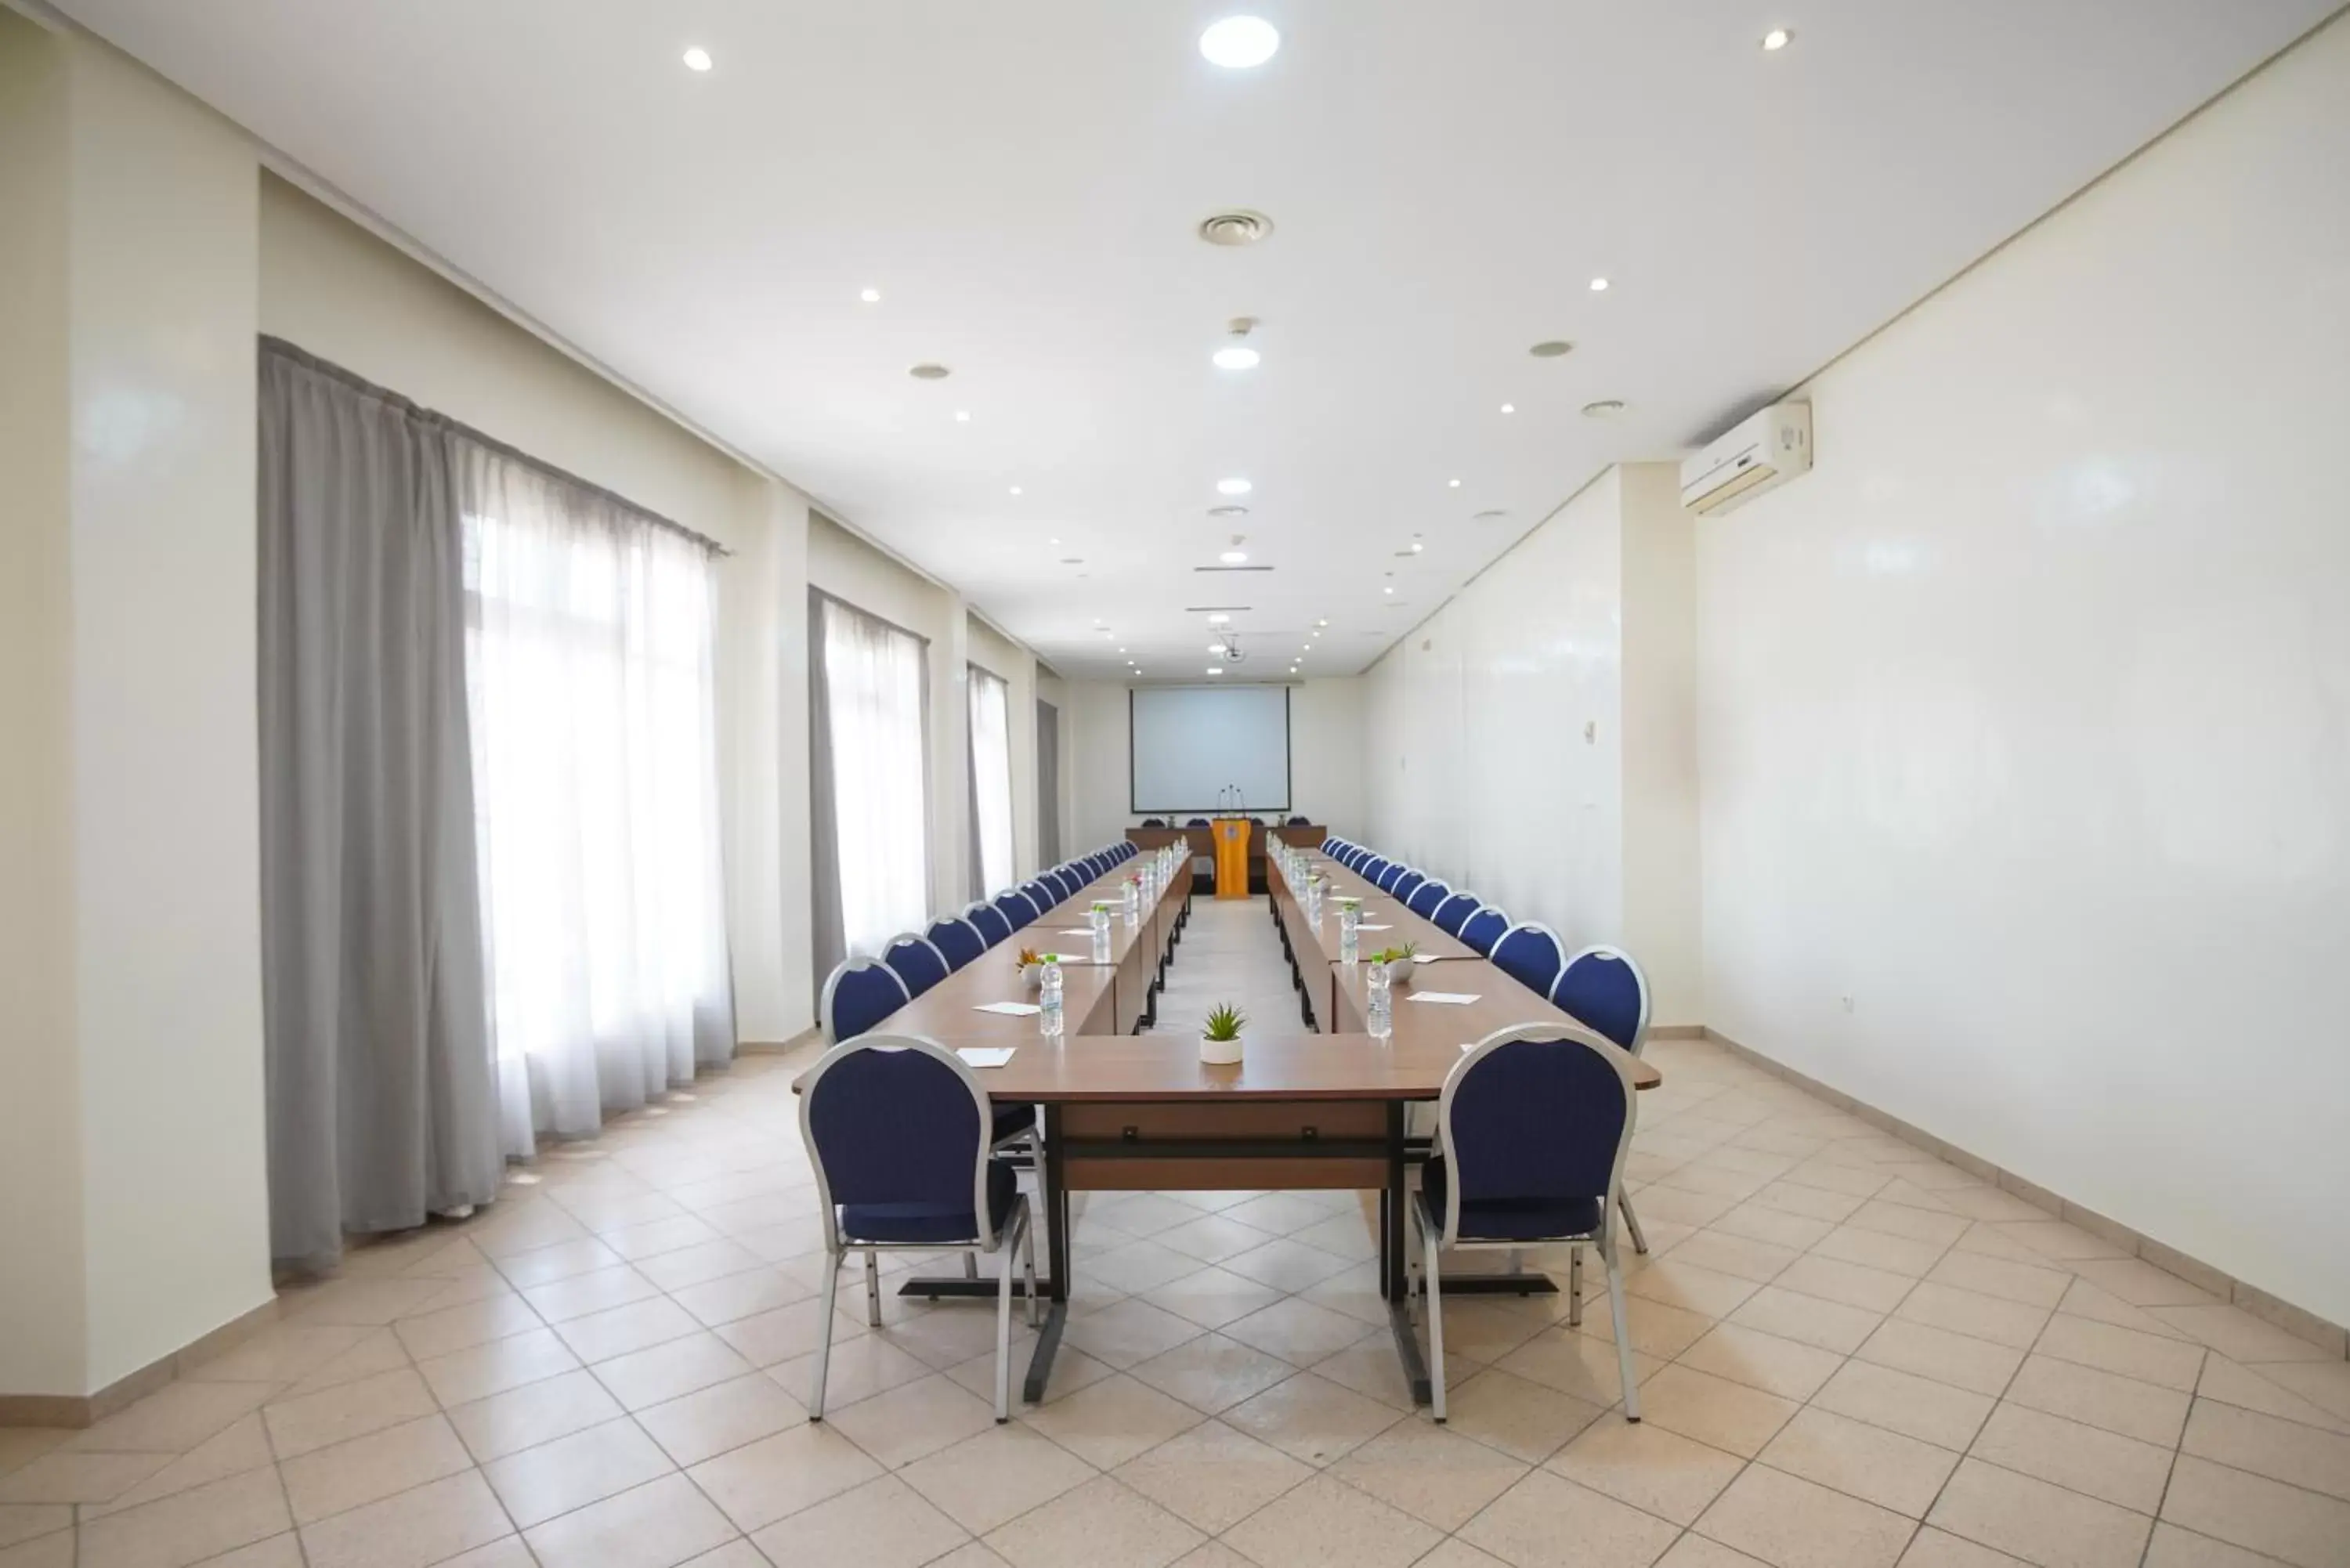 Meeting/conference room in Hotel Tildi Hotel & Spa